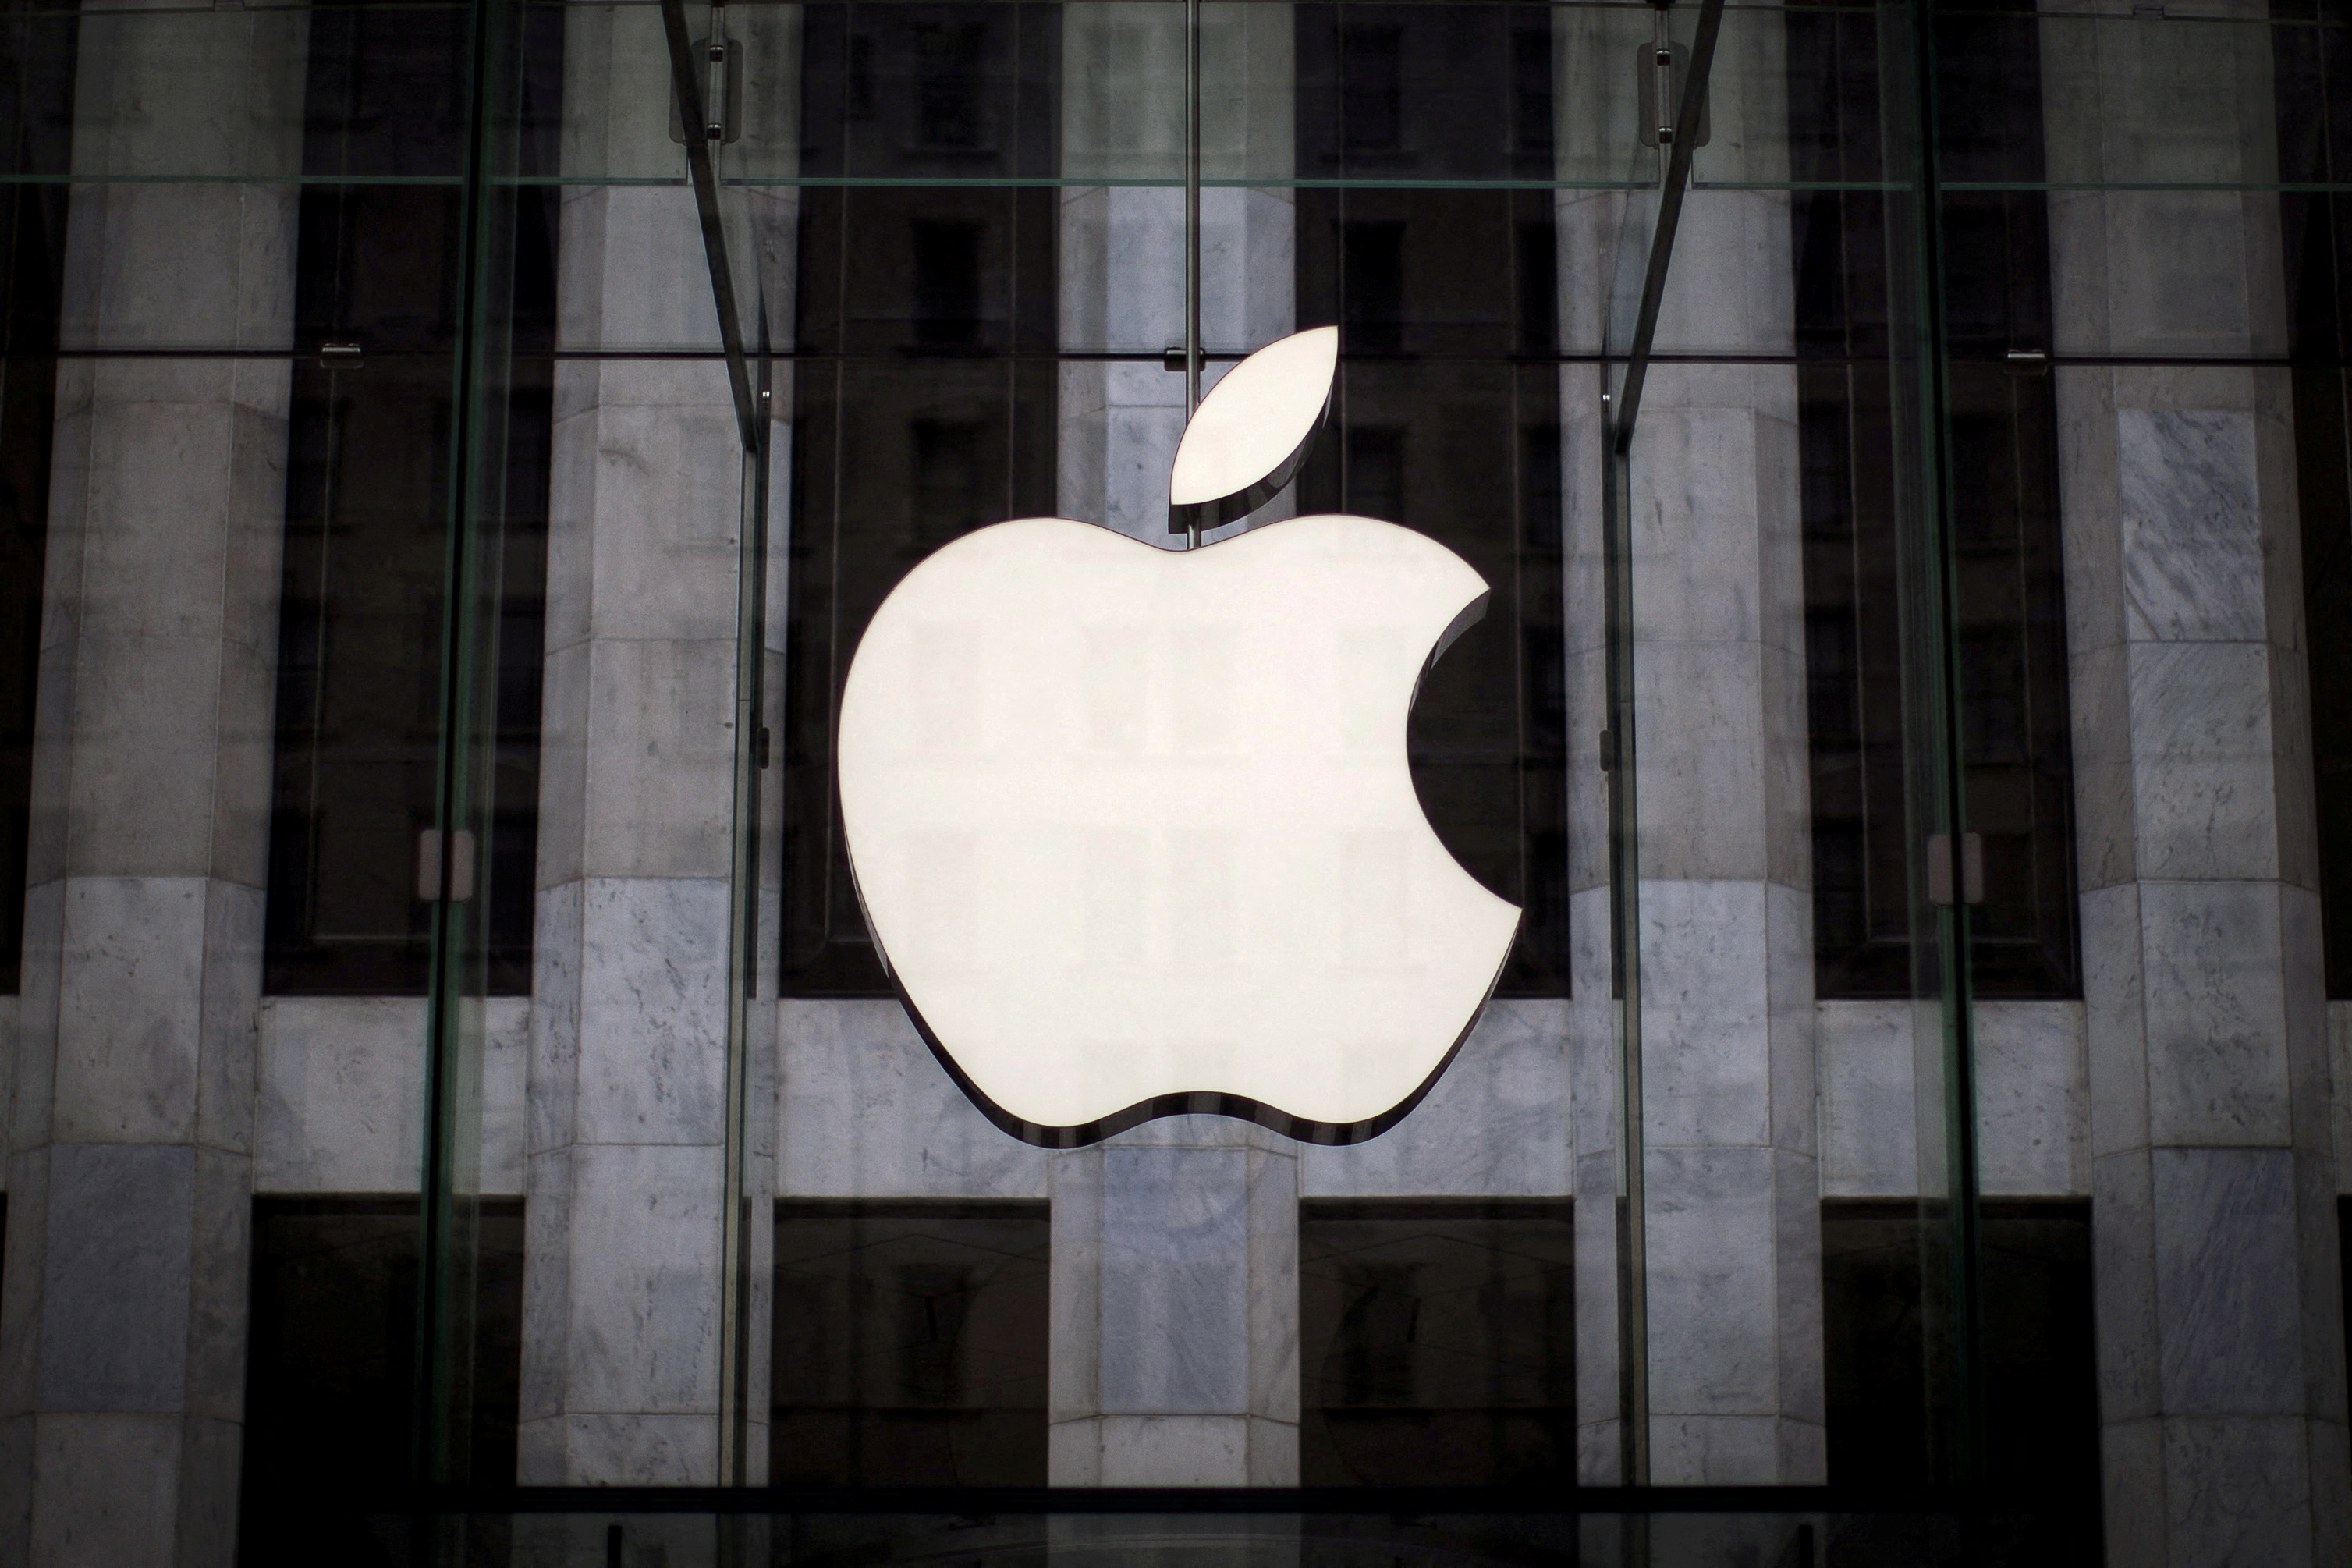 Apple workers at Maryland store vote to unionise, a first for the US